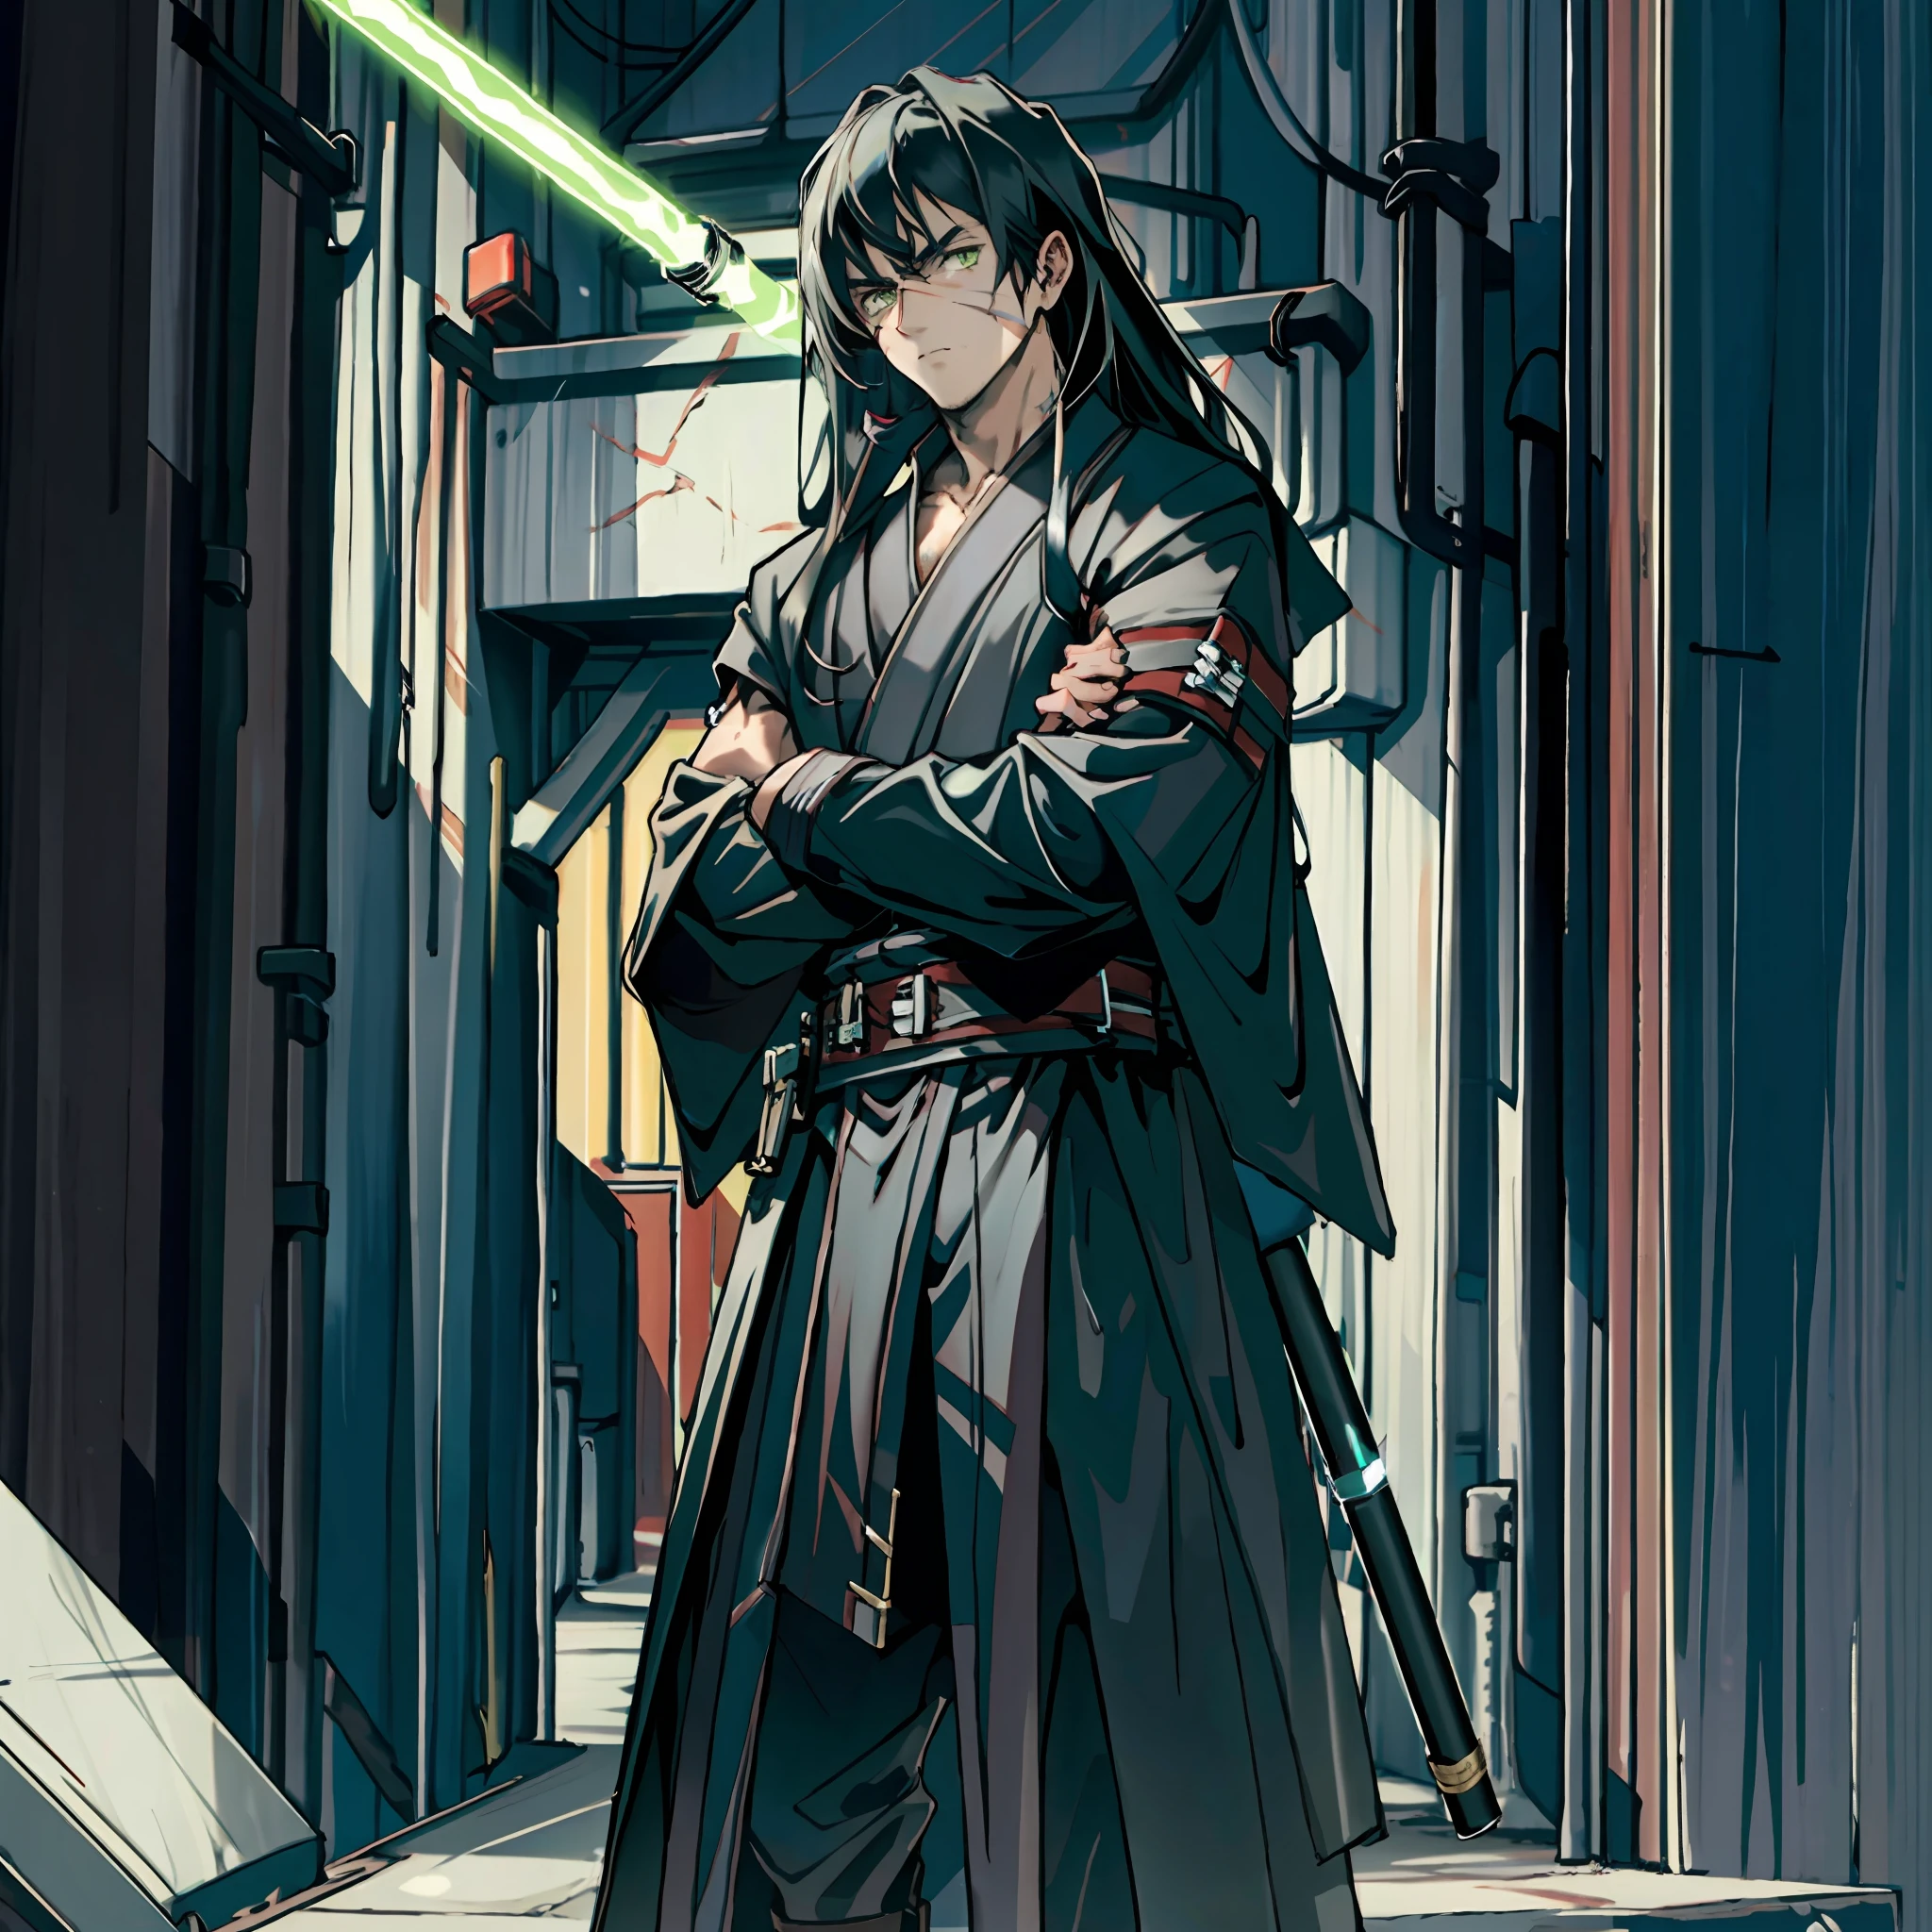 8k, Best quality, masterpiece, 1boy, long black hair, tall, lean, Jedi outfit, dark Jedi outfit, sith, sith outfit, 1human, male, half-lidded expression, bored look, cold stare, Facial scar, face scar, dark background, low exposure, in jedioutfit, arms crossed, lightsaber on belt, lime green eyes